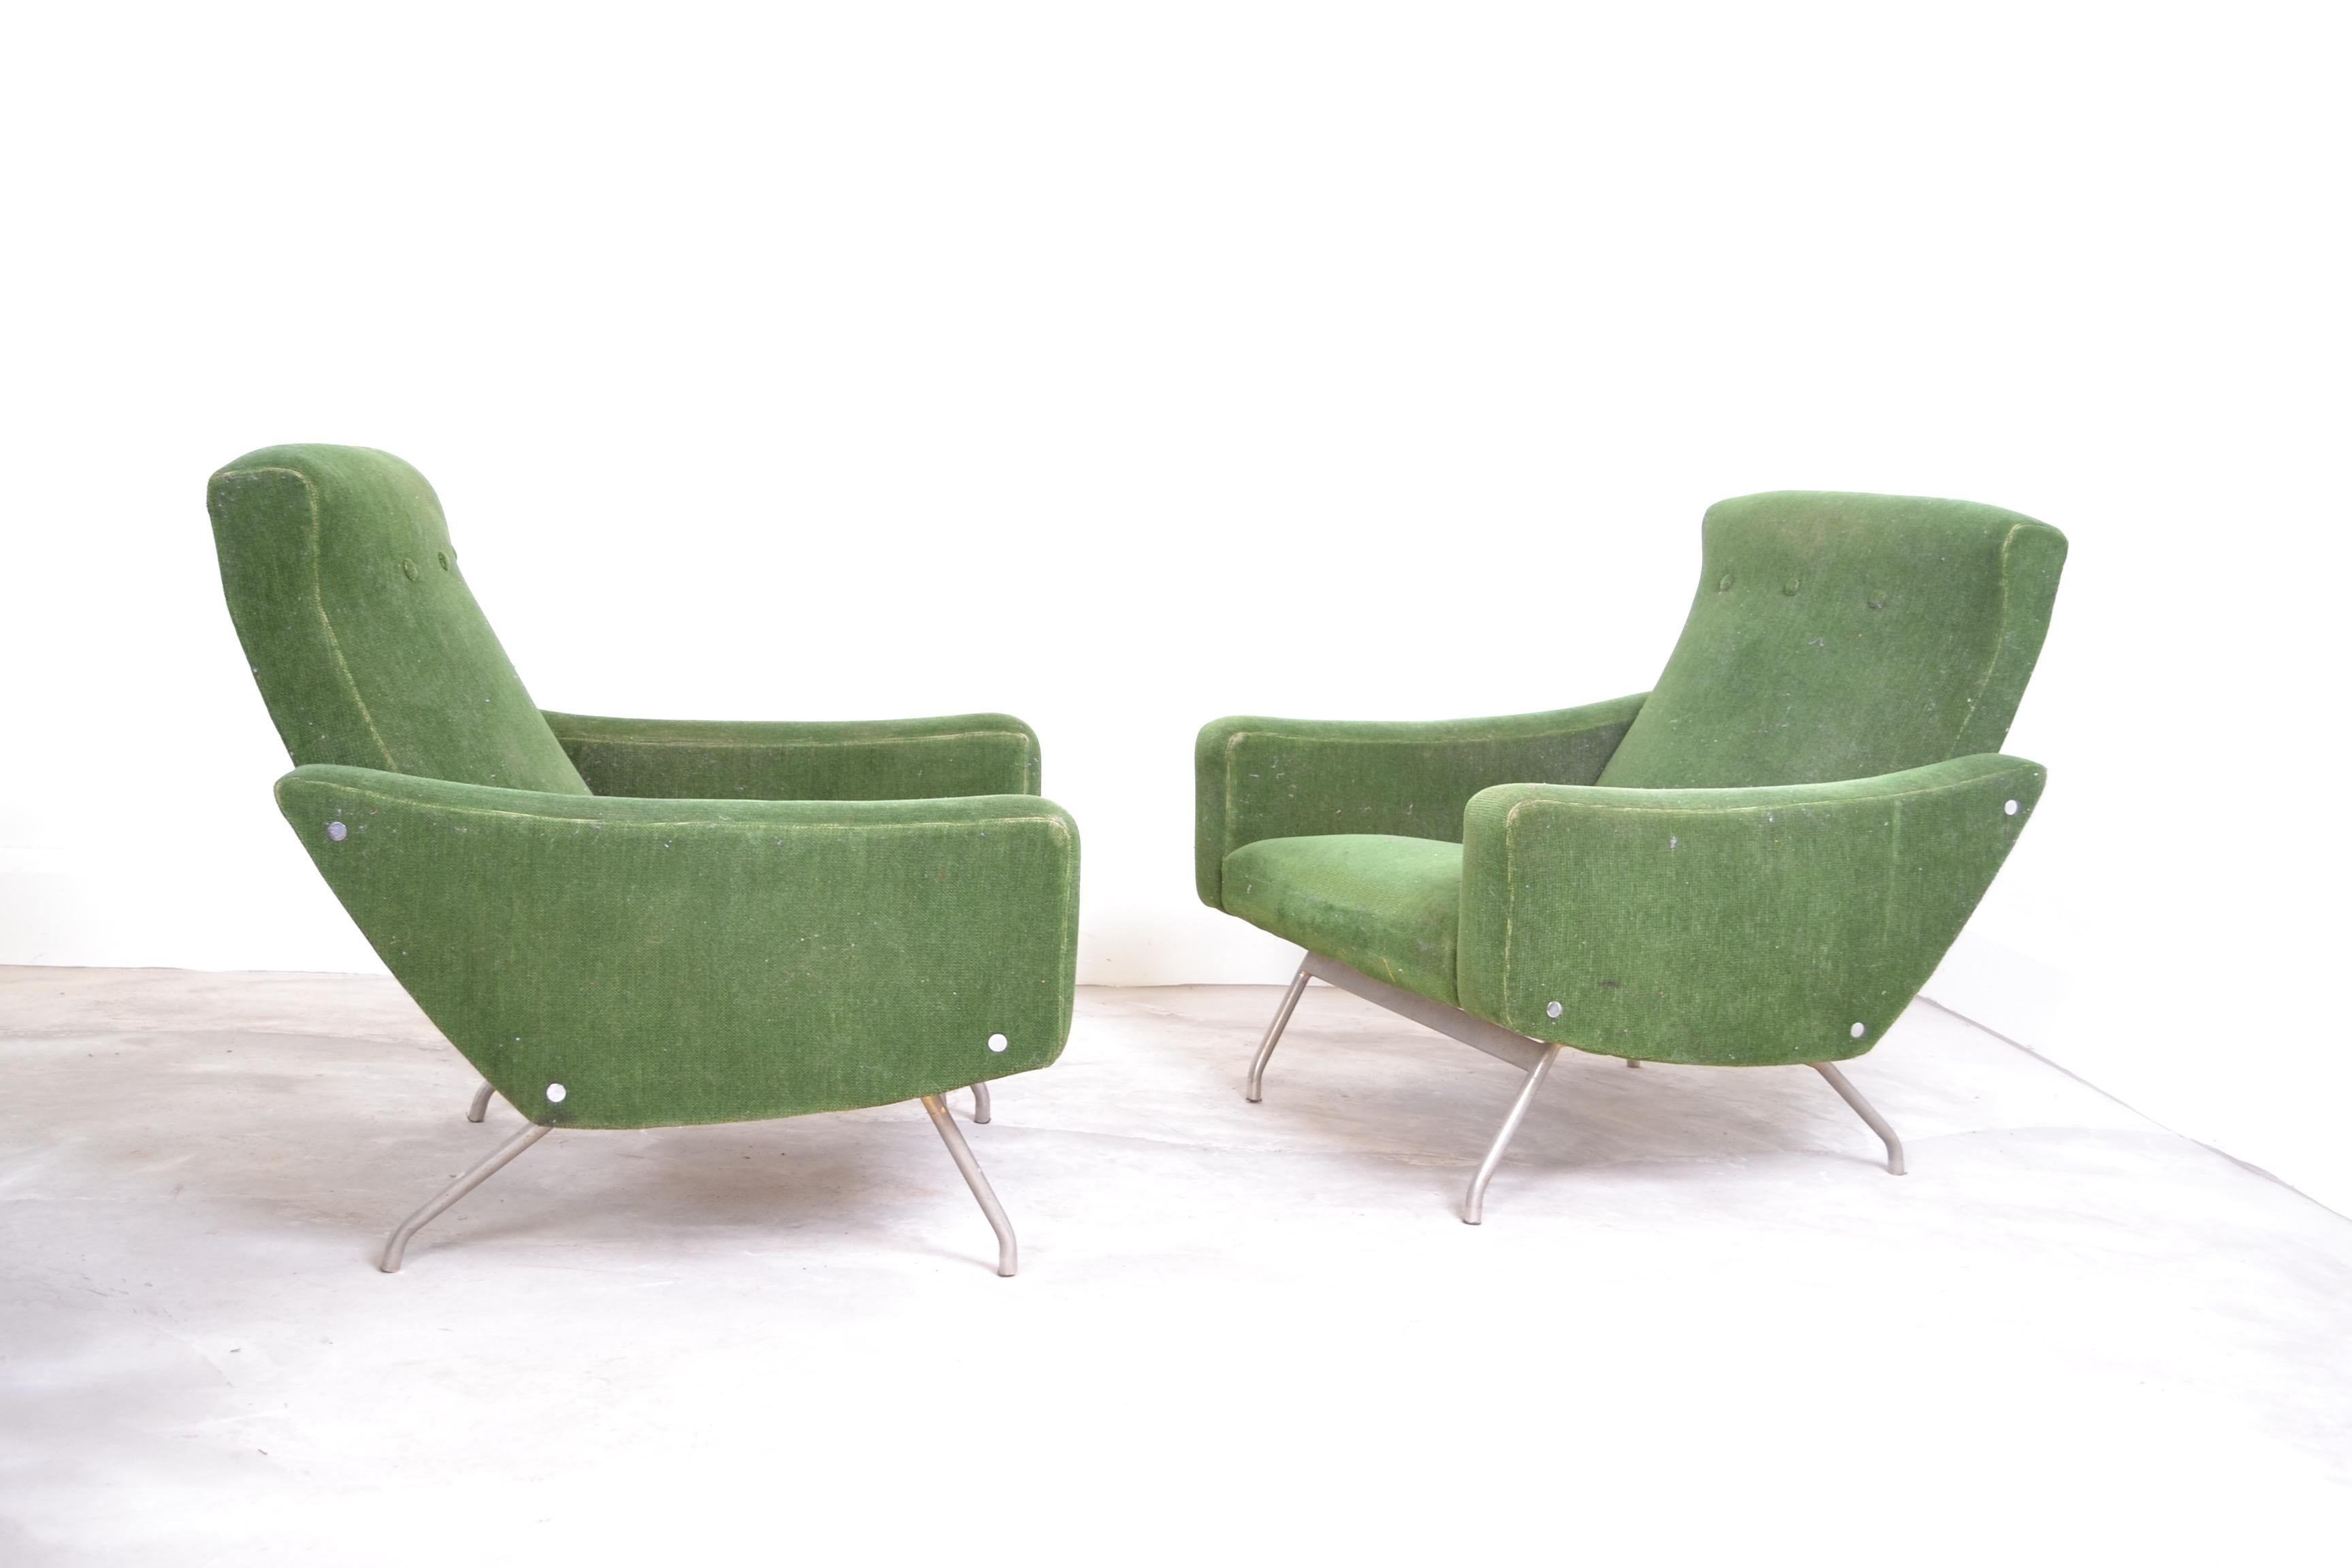 Pair of Joseph Andre Motte armchairs manufactured by Steiner.
These chairs are the steel leg version and have the original Steiner label underneath.
These are a very comfortable large scale pair of armchairs and have been left in
original